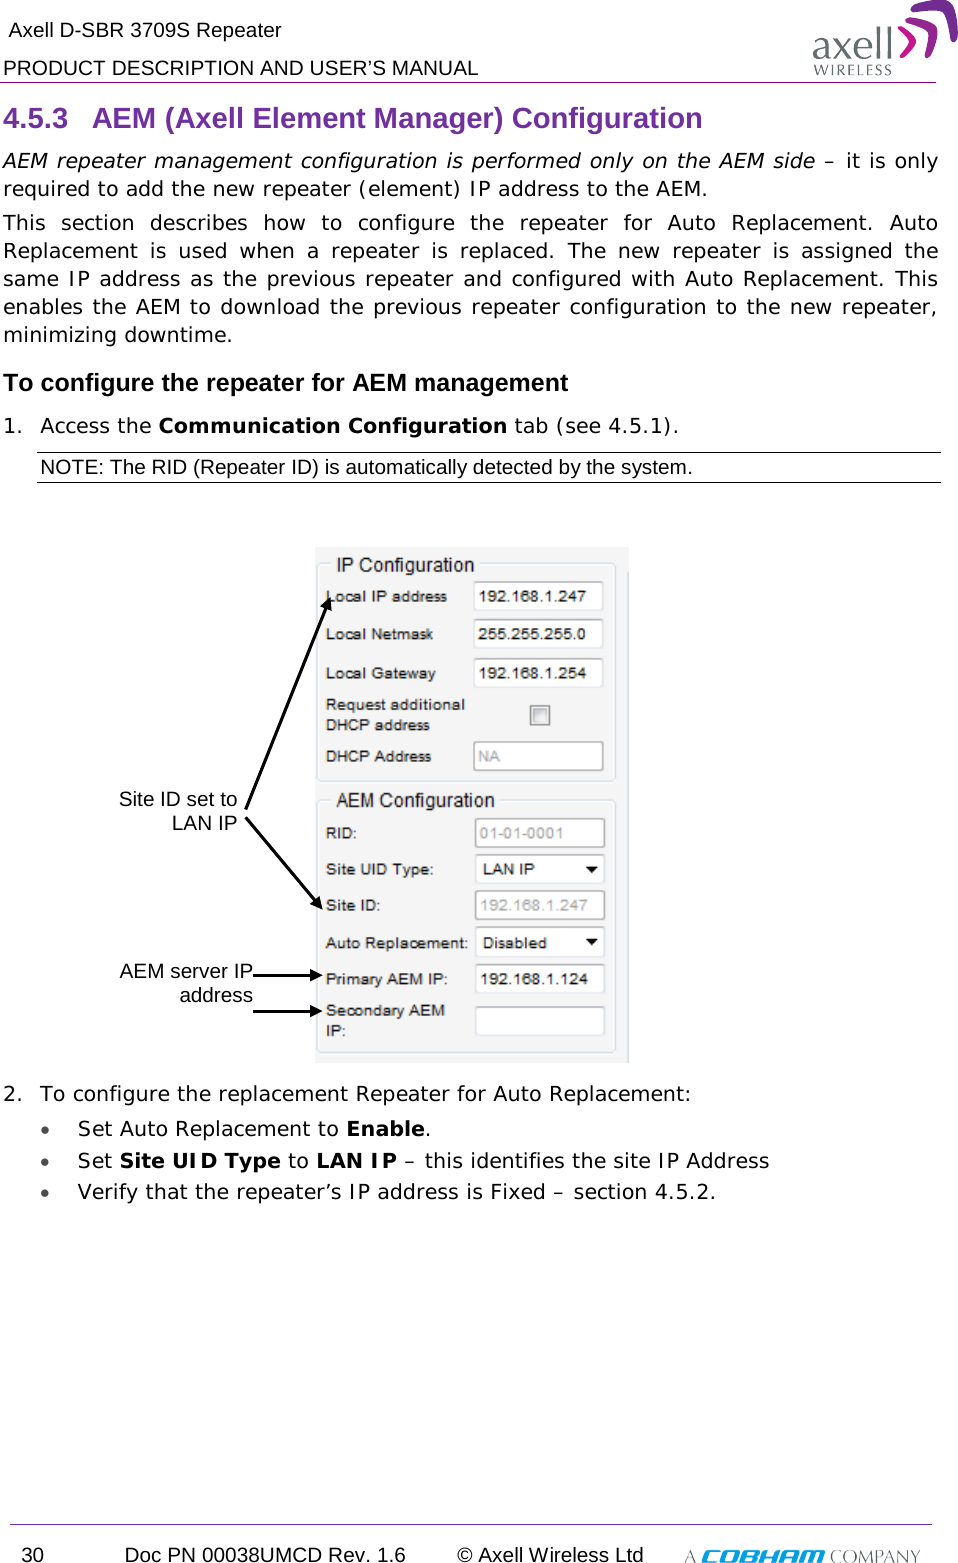  Axell D-SBR 3709S Repeater PRODUCT DESCRIPTION AND USER’S MANUAL 30 Doc PN 00038UMCD Rev. 1.6 © Axell Wireless Ltd   4.5.3  AEM (Axell Element Manager) Configuration AEM repeater management configuration is performed only on the AEM side – it is only required to add the new repeater (element) IP address to the AEM.  This section describes how to configure the repeater for Auto Replacement. Auto Replacement is used when a repeater is replaced. The new repeater is assigned the same IP address as the previous repeater and configured with Auto Replacement. This enables the AEM to download the previous repeater configuration to the new repeater, minimizing downtime.  To configure the repeater for AEM management 1.  Access the Communication Configuration tab (see  4.5.1). NOTE: The RID (Repeater ID) is automatically detected by the system.   2.  To configure the replacement Repeater for Auto Replacement:  • Set Auto Replacement to Enable. • Set Site UID Type to LAN IP – this identifies the site IP Address • Verify that the repeater’s IP address is Fixed – section  4.5.2. AEM server IP address Site ID set to  LAN IP 